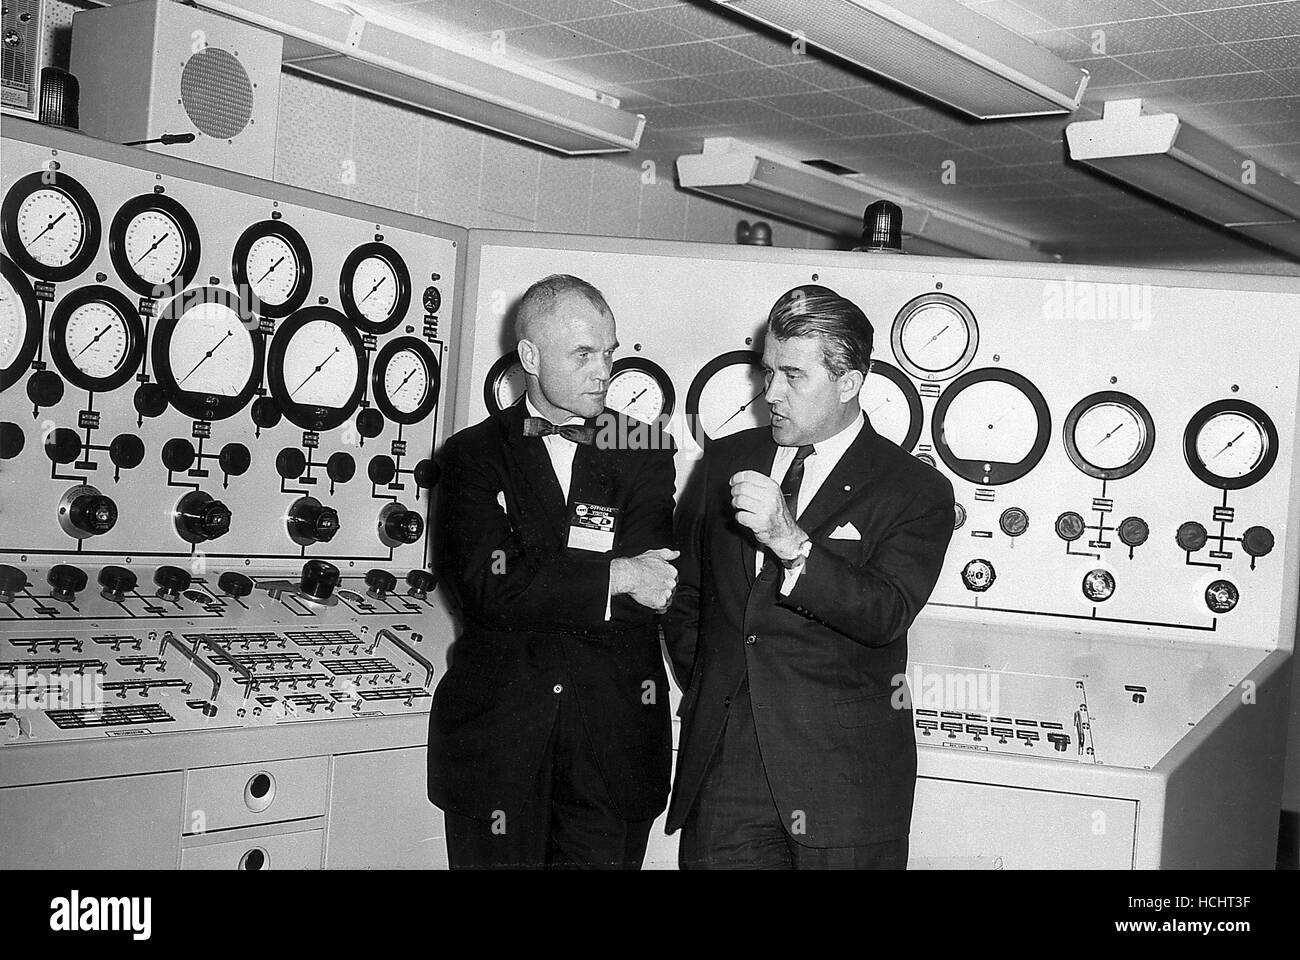 Dr. Wernher von Braun, right, briefs Astronaut John Glenn, left, in the control room of the Vehicle Test Section, Quality Assurance Division, Marshall Space Flight Center (MSFC) in Huntsville, Alabama, November 28, 1962.Credit: NASA via CNP - NO WIRE SERVICE - Photo: Nasa/Consolidated News Photos/NASA via CNP Stock Photo